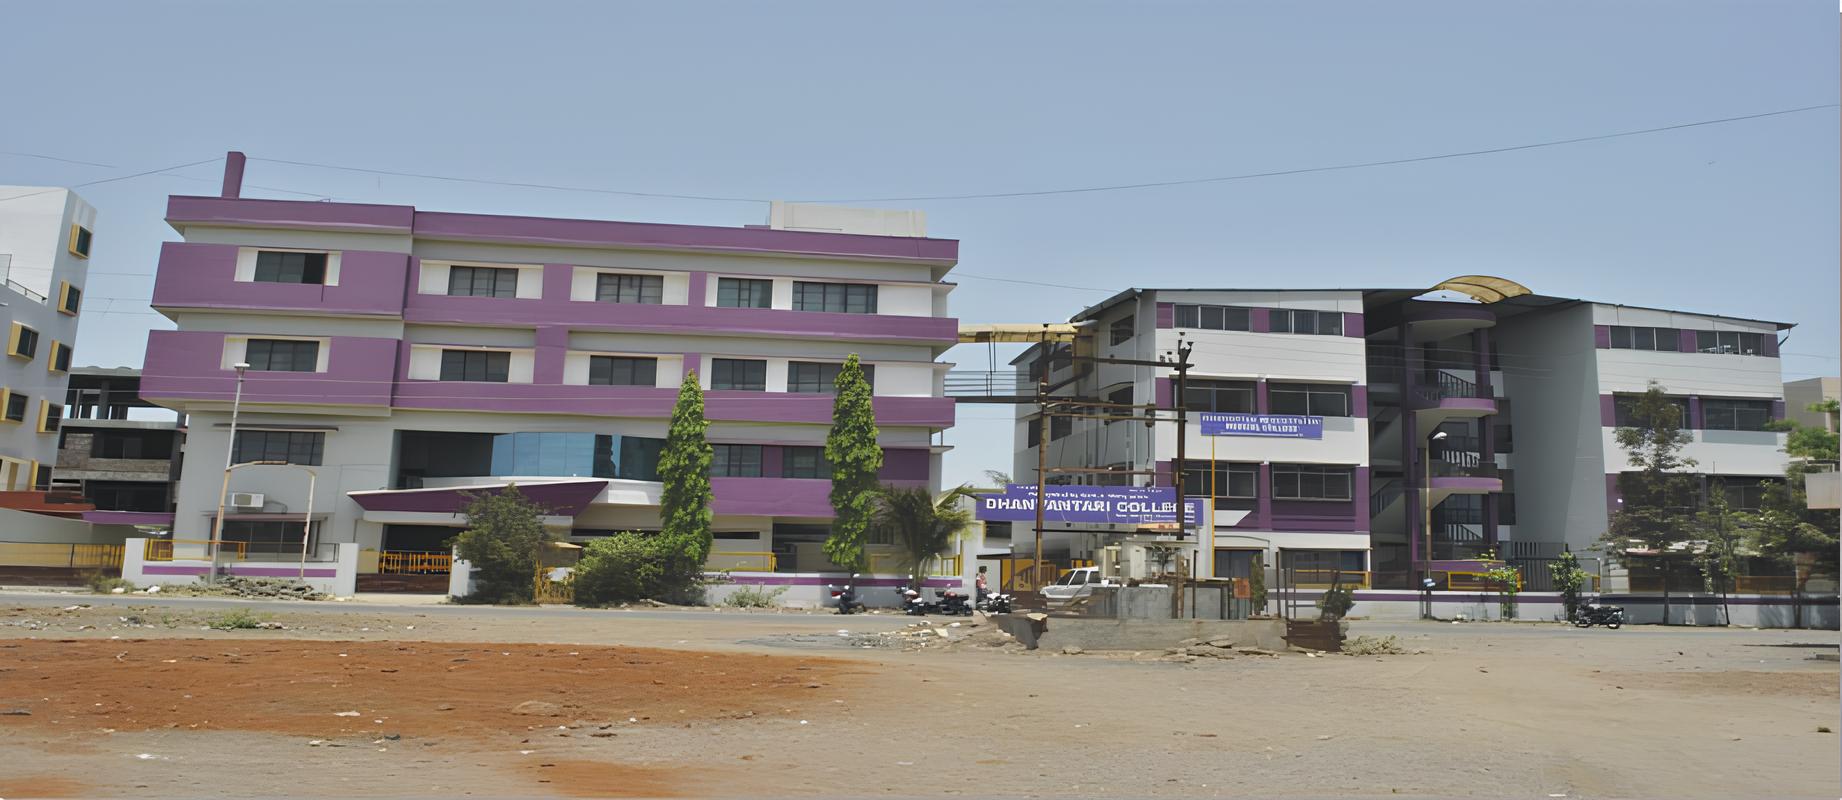 Dhanvantari Homoeopathic Medical College and Hospital Nashik Admission, Courses, Eligibility, Fees, Facilities